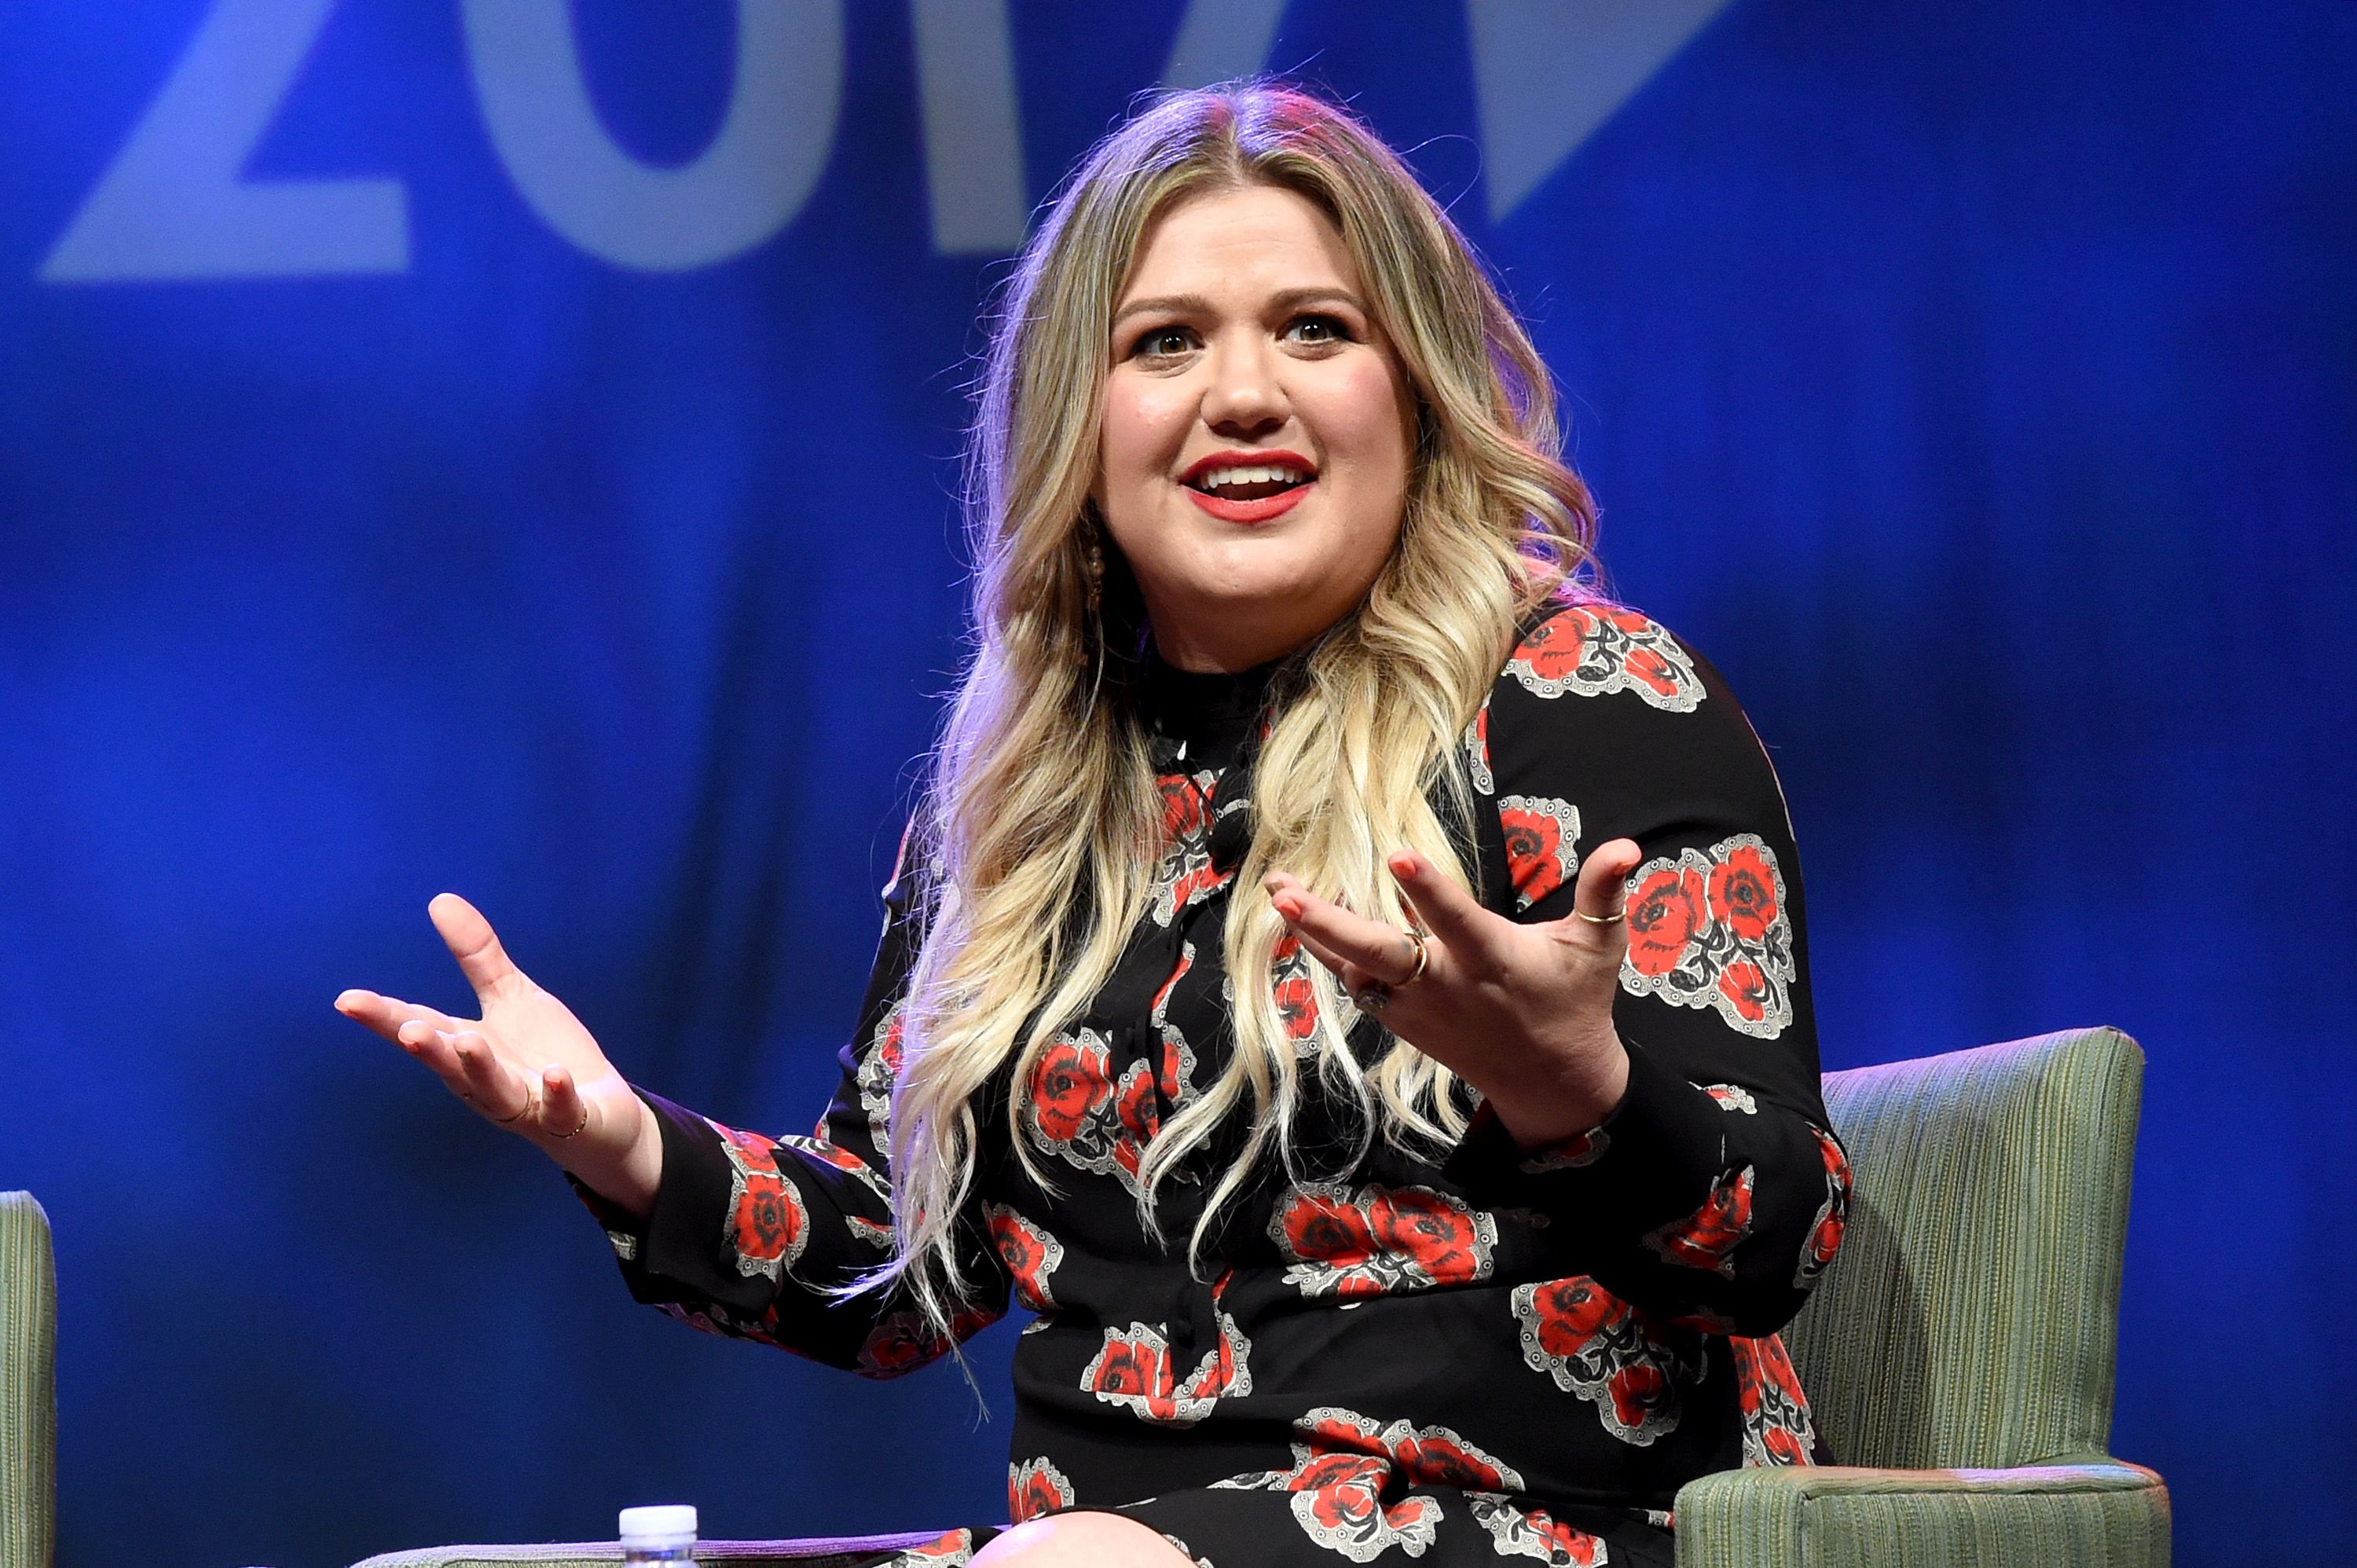 Kelly Clarkson at the Featured Presentation: Music's Leading Ladies Speak Out panel on May 16, 2017 in Nashville, Tennessee | Photo: Getty Images